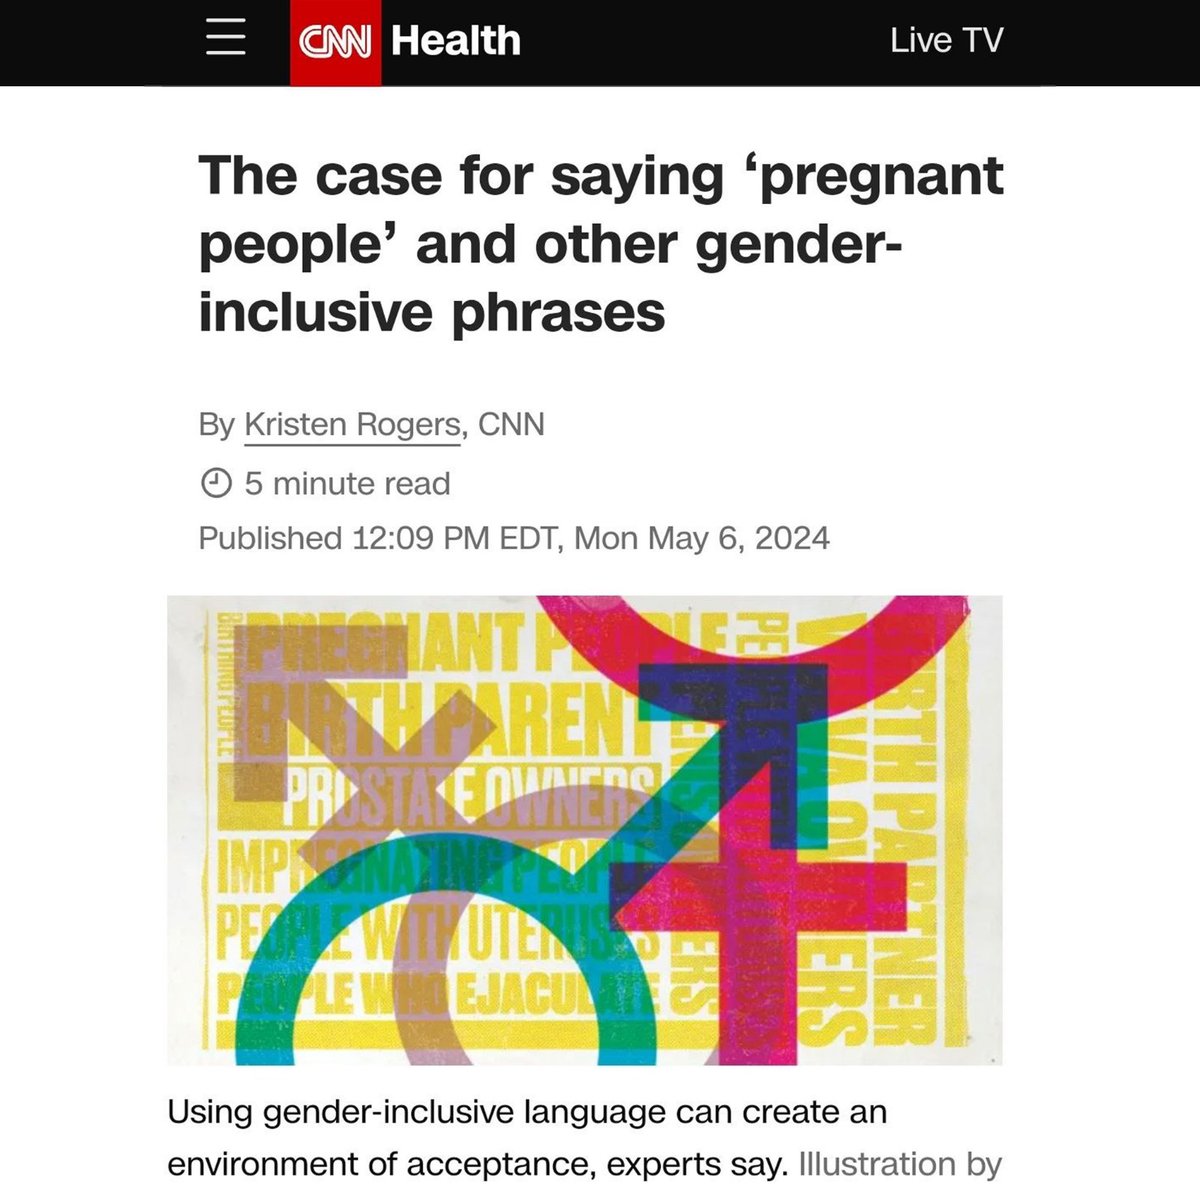 Let's take a moment to remember that MSM is actively attempting to destroy what it means to be a mother in the name of 'inclusivity.' Only women can get pregnant. Only women can be mothers. Happy Mother's Day!